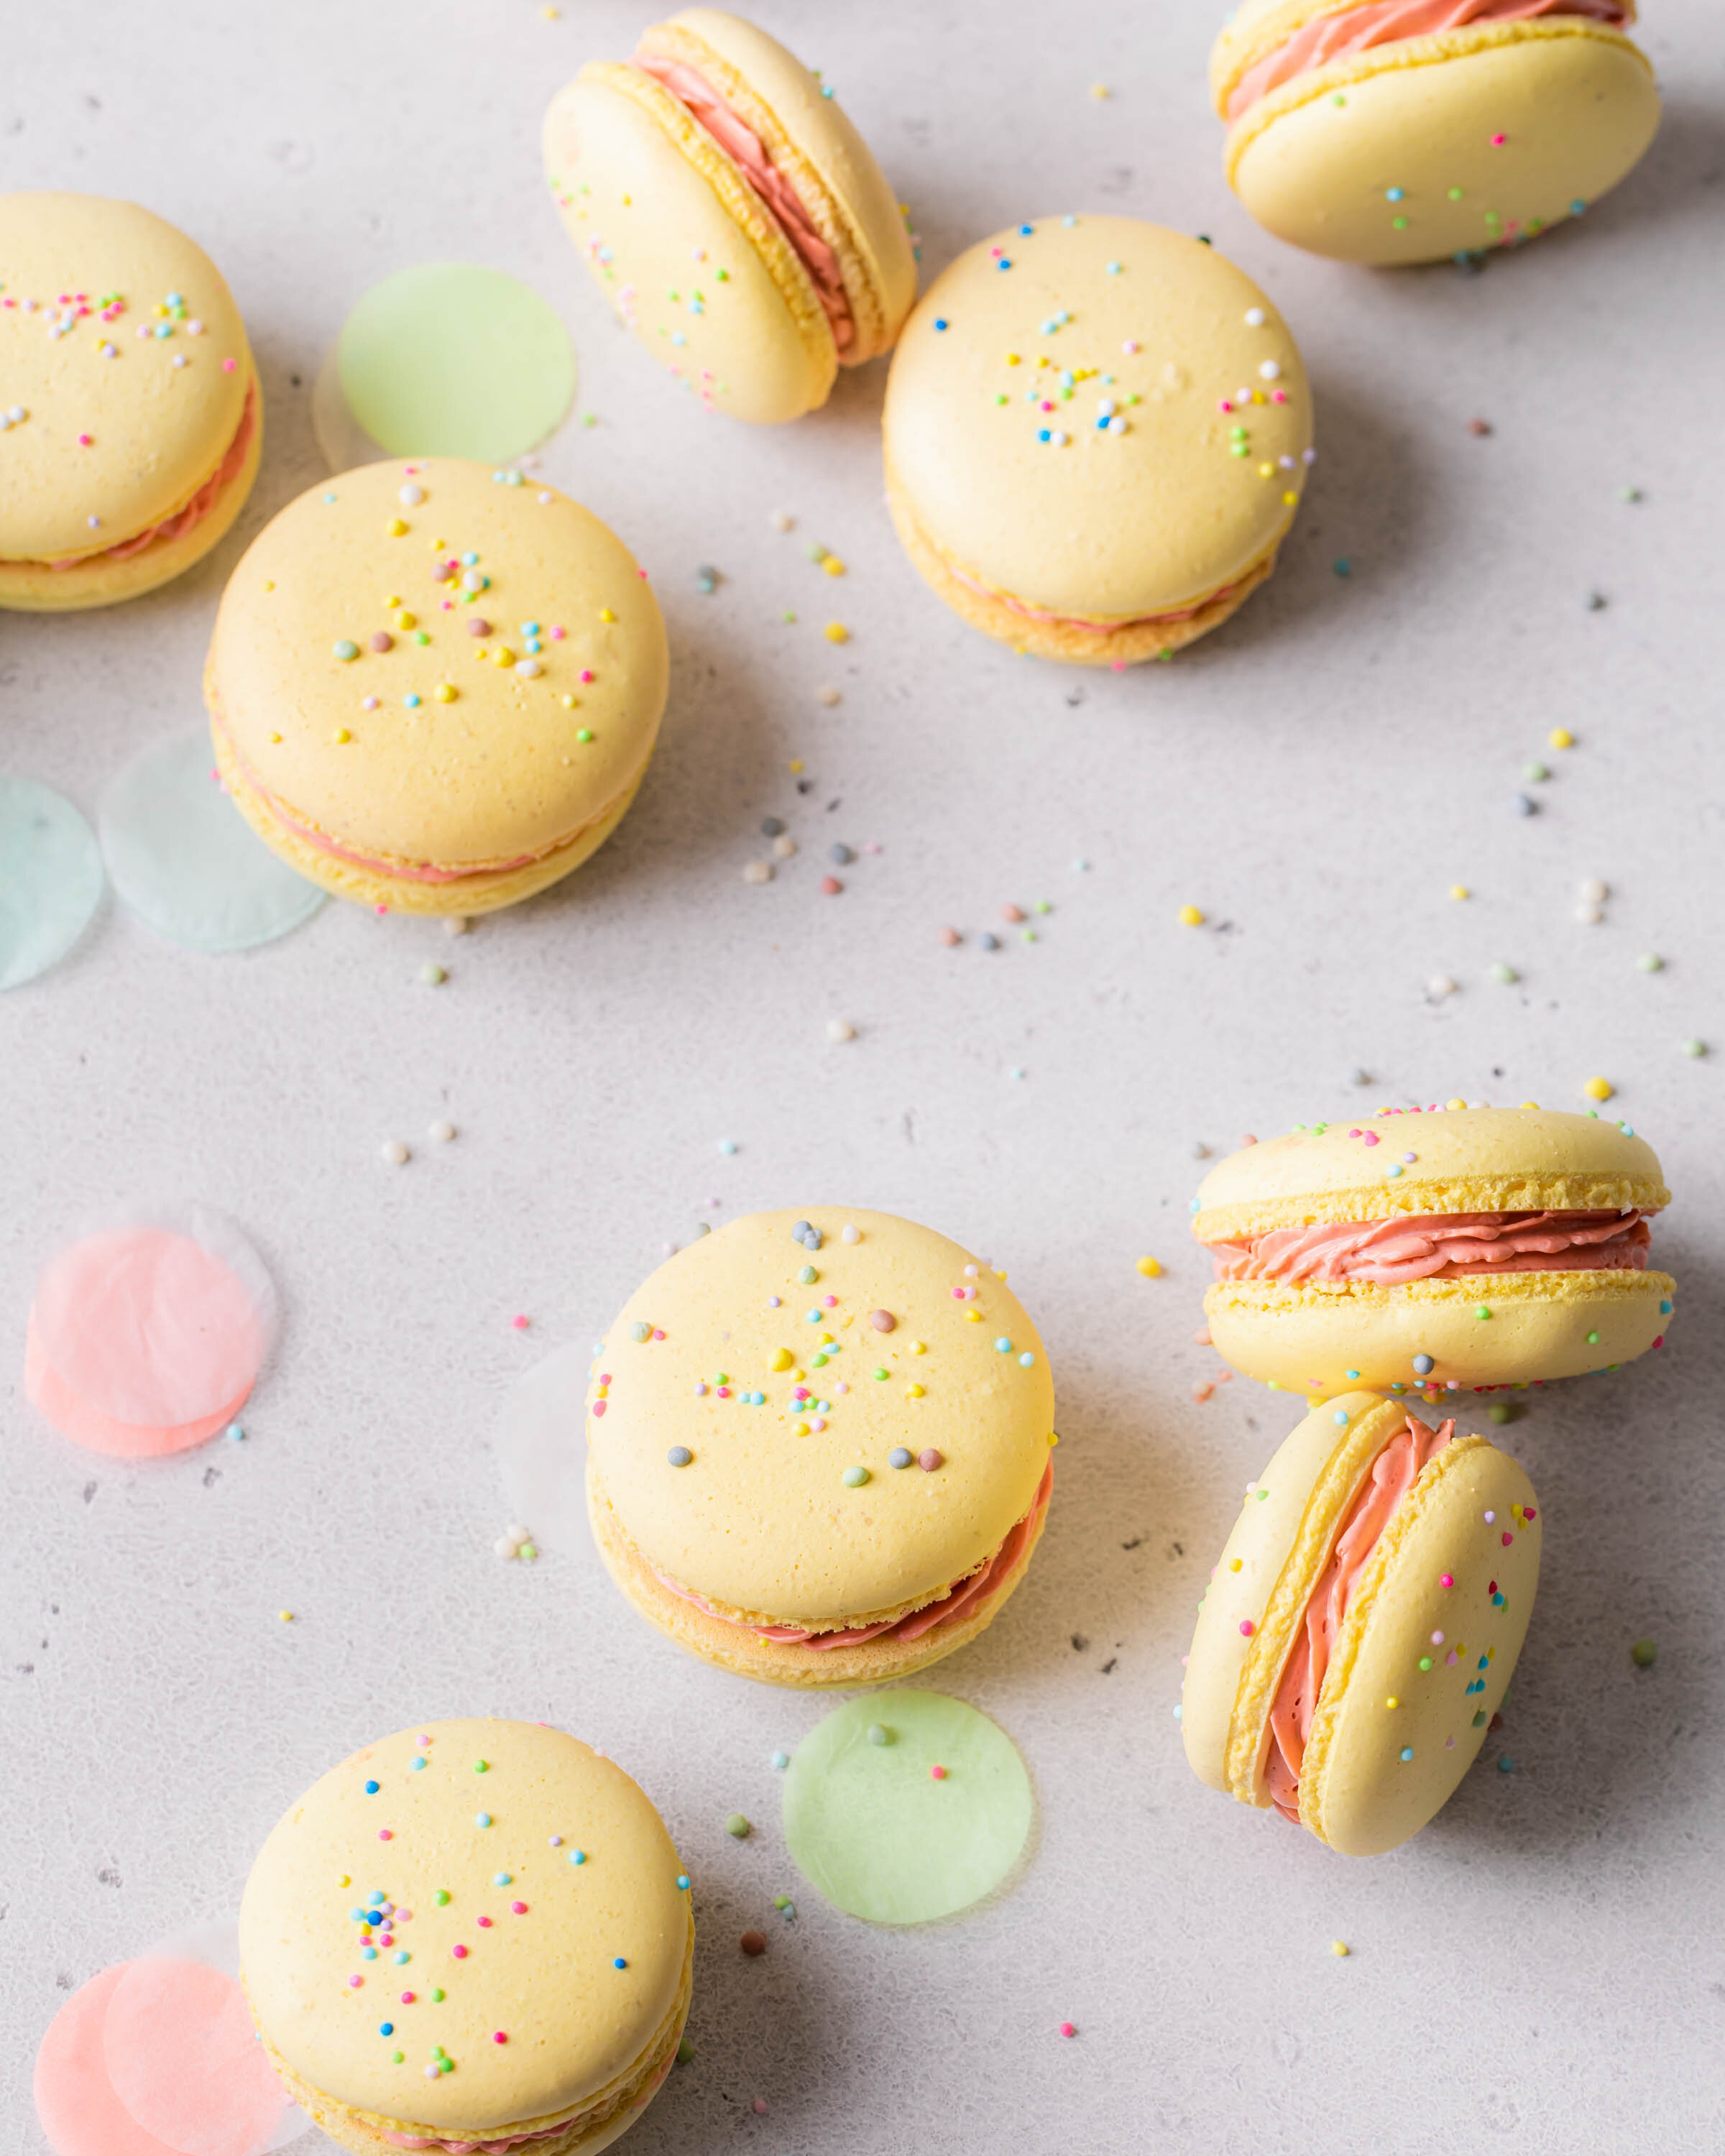 Confetti French macarons with sprinkles on top.